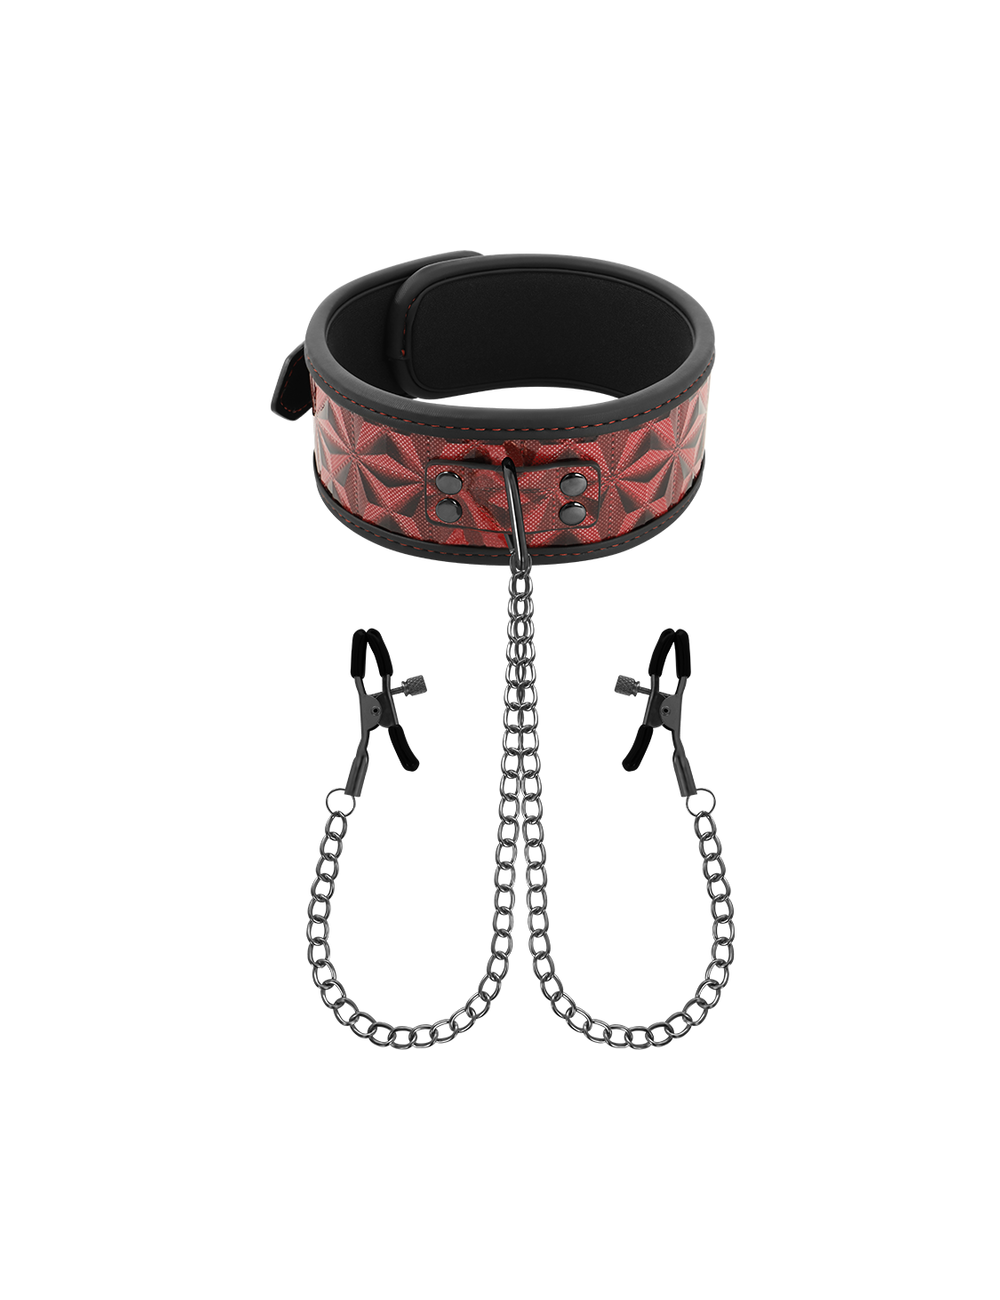 Sextoys - Bondage - SM - COLLIER BEGME RED EDITION AVEC CHAINES ET MAMELONS - BEGME RED EDITION